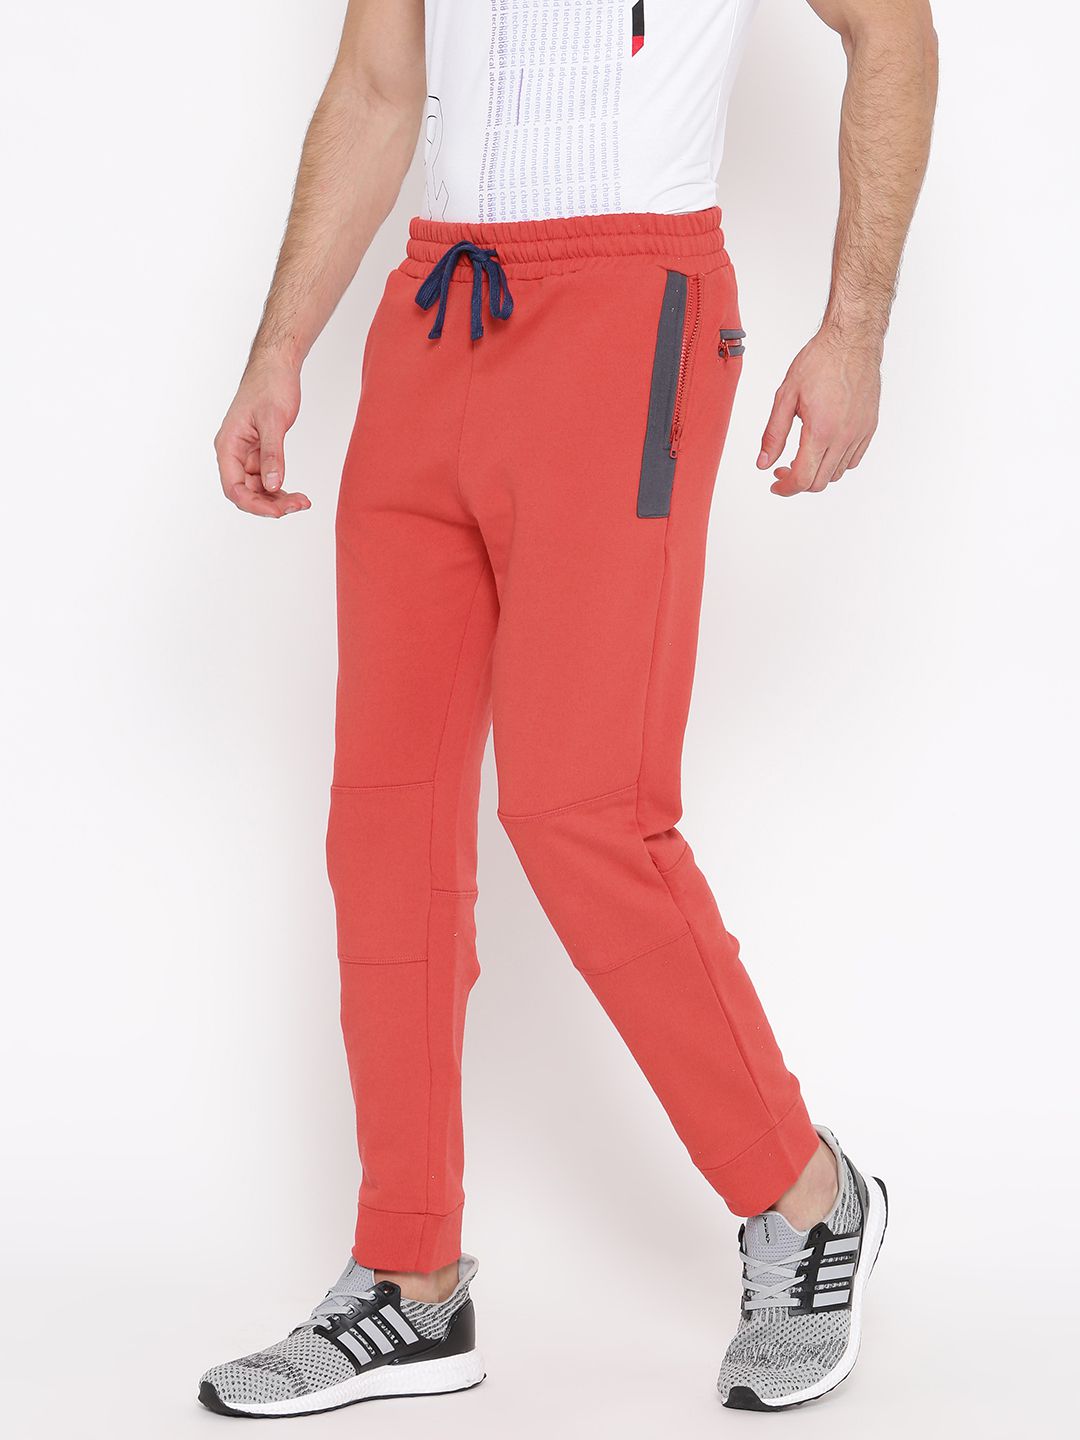 United Colors of Benetton Red Cotton Trackpants - Buy United Colors of ...